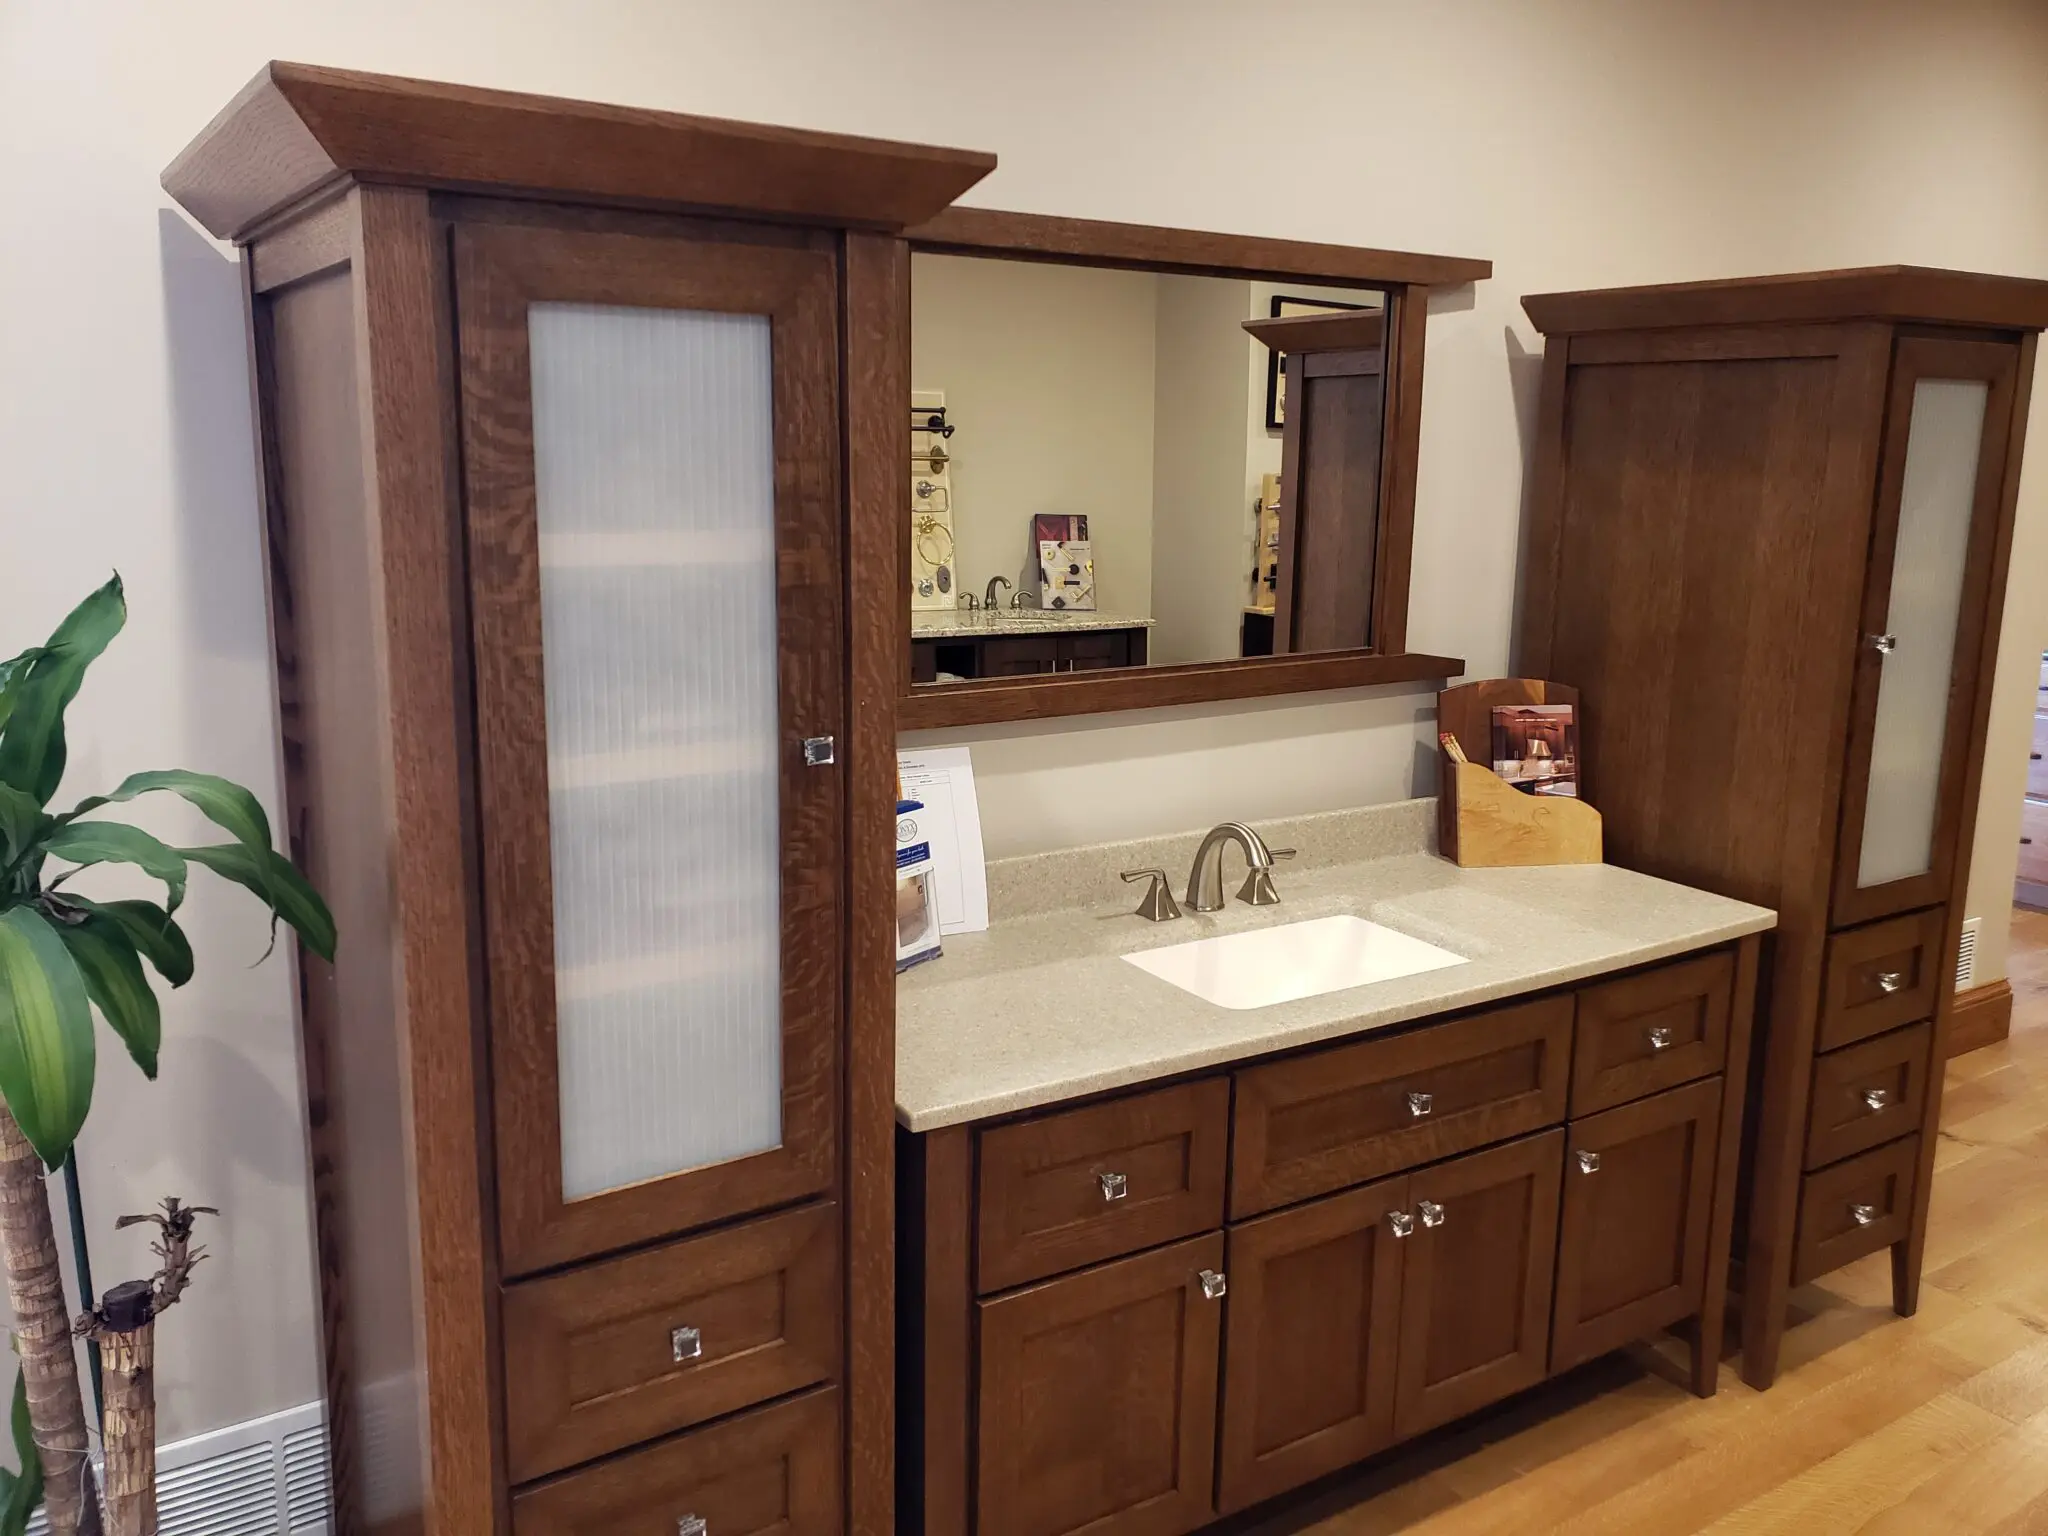 The Bathroom cabinet vanity with side cabinets